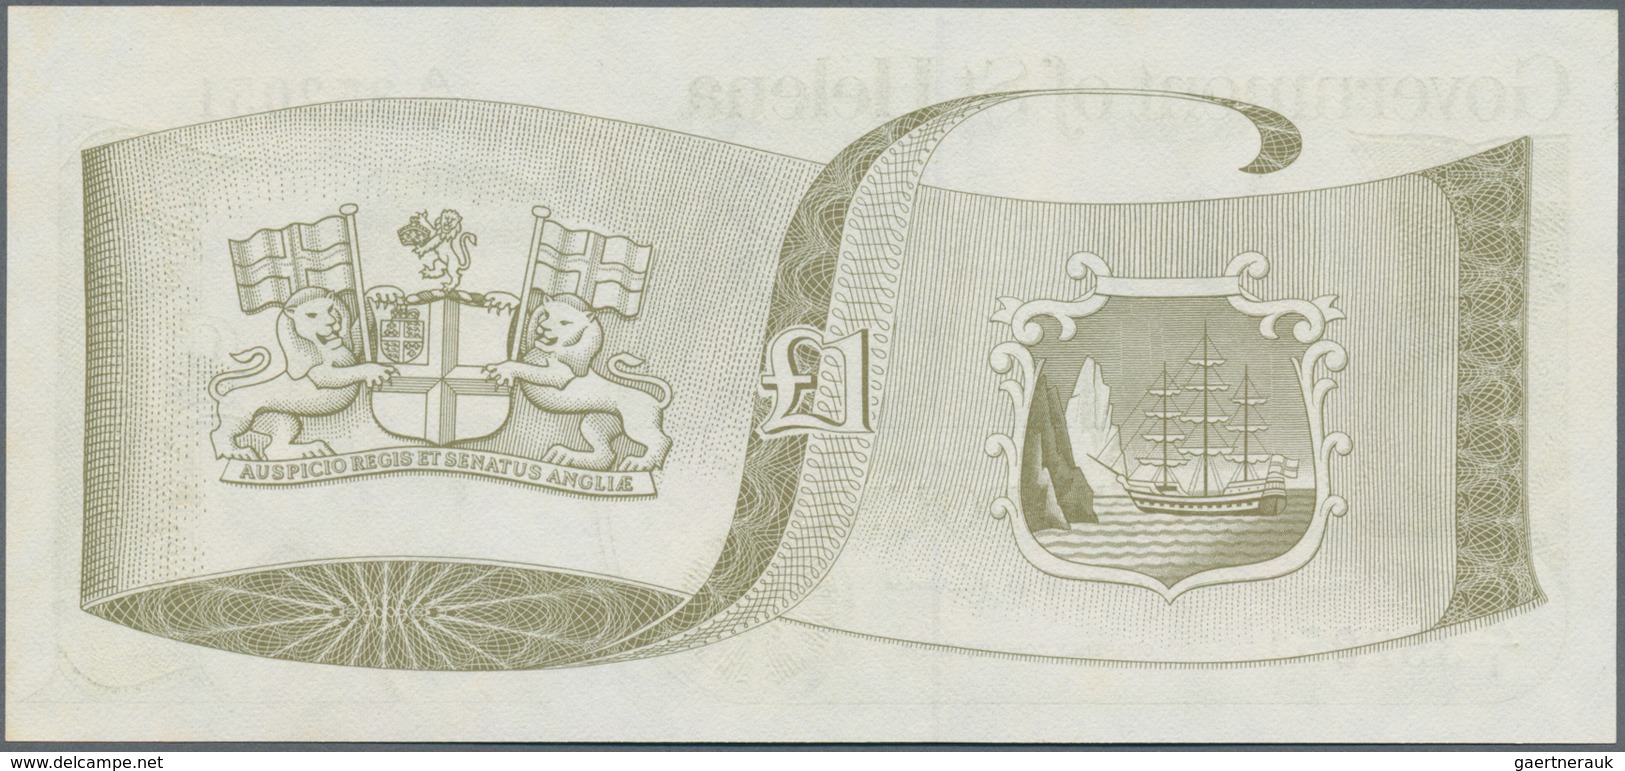 St. Helena: Nice Set With 5 Banknotes Including 2x 1 Pound ND(1981) P.9 With Running Serial Numbers - Isla Santa Helena